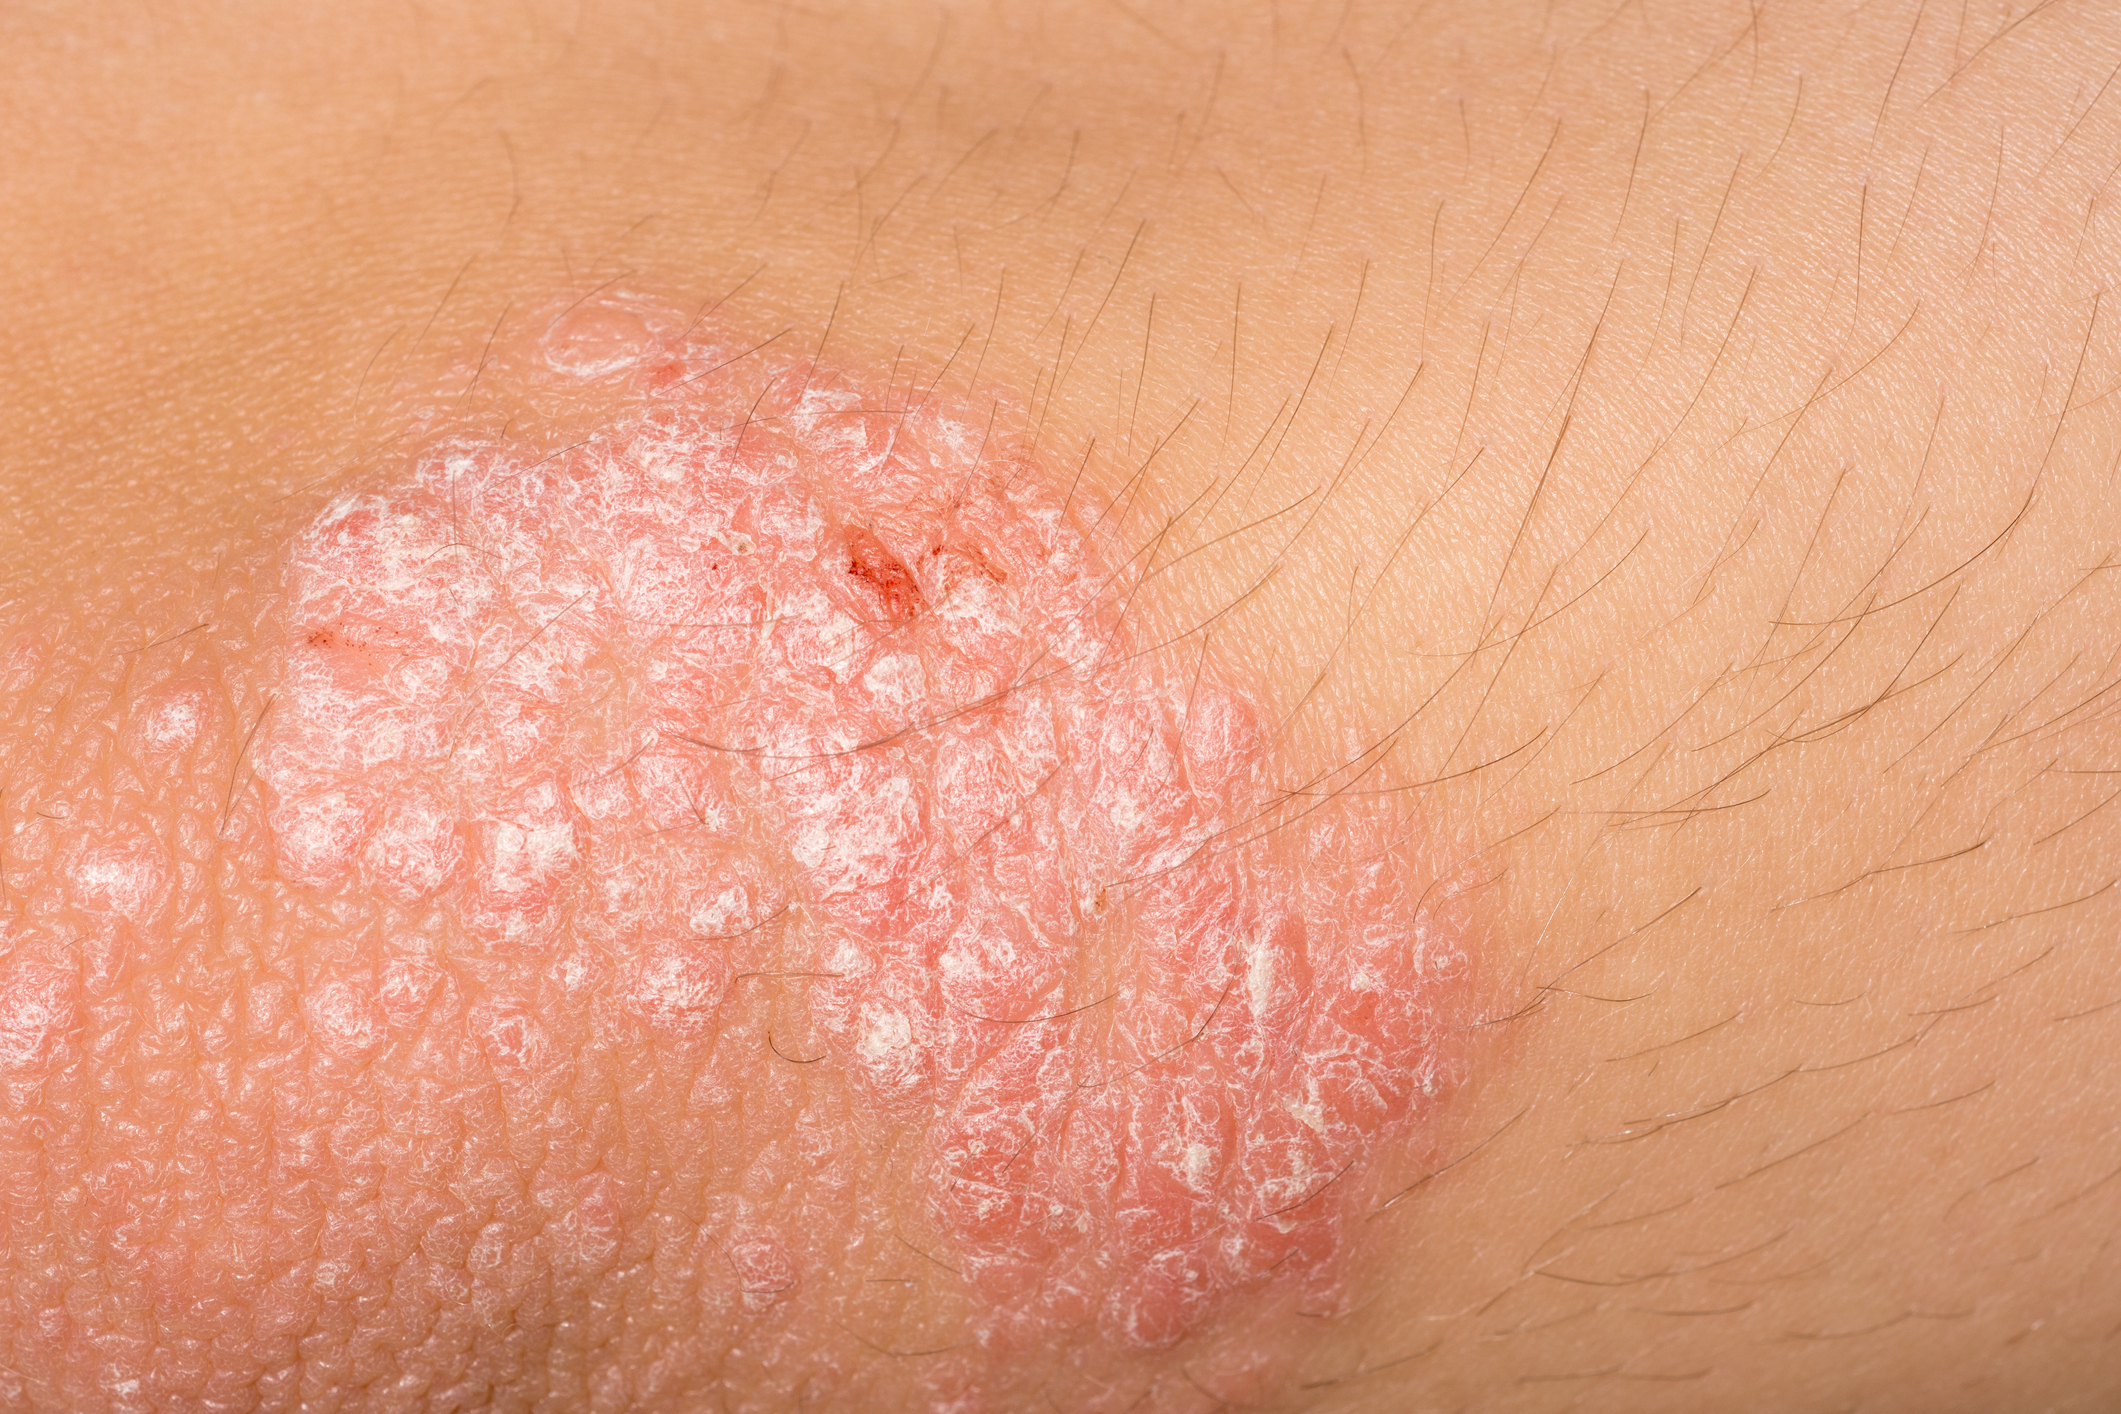 psoriasis scales